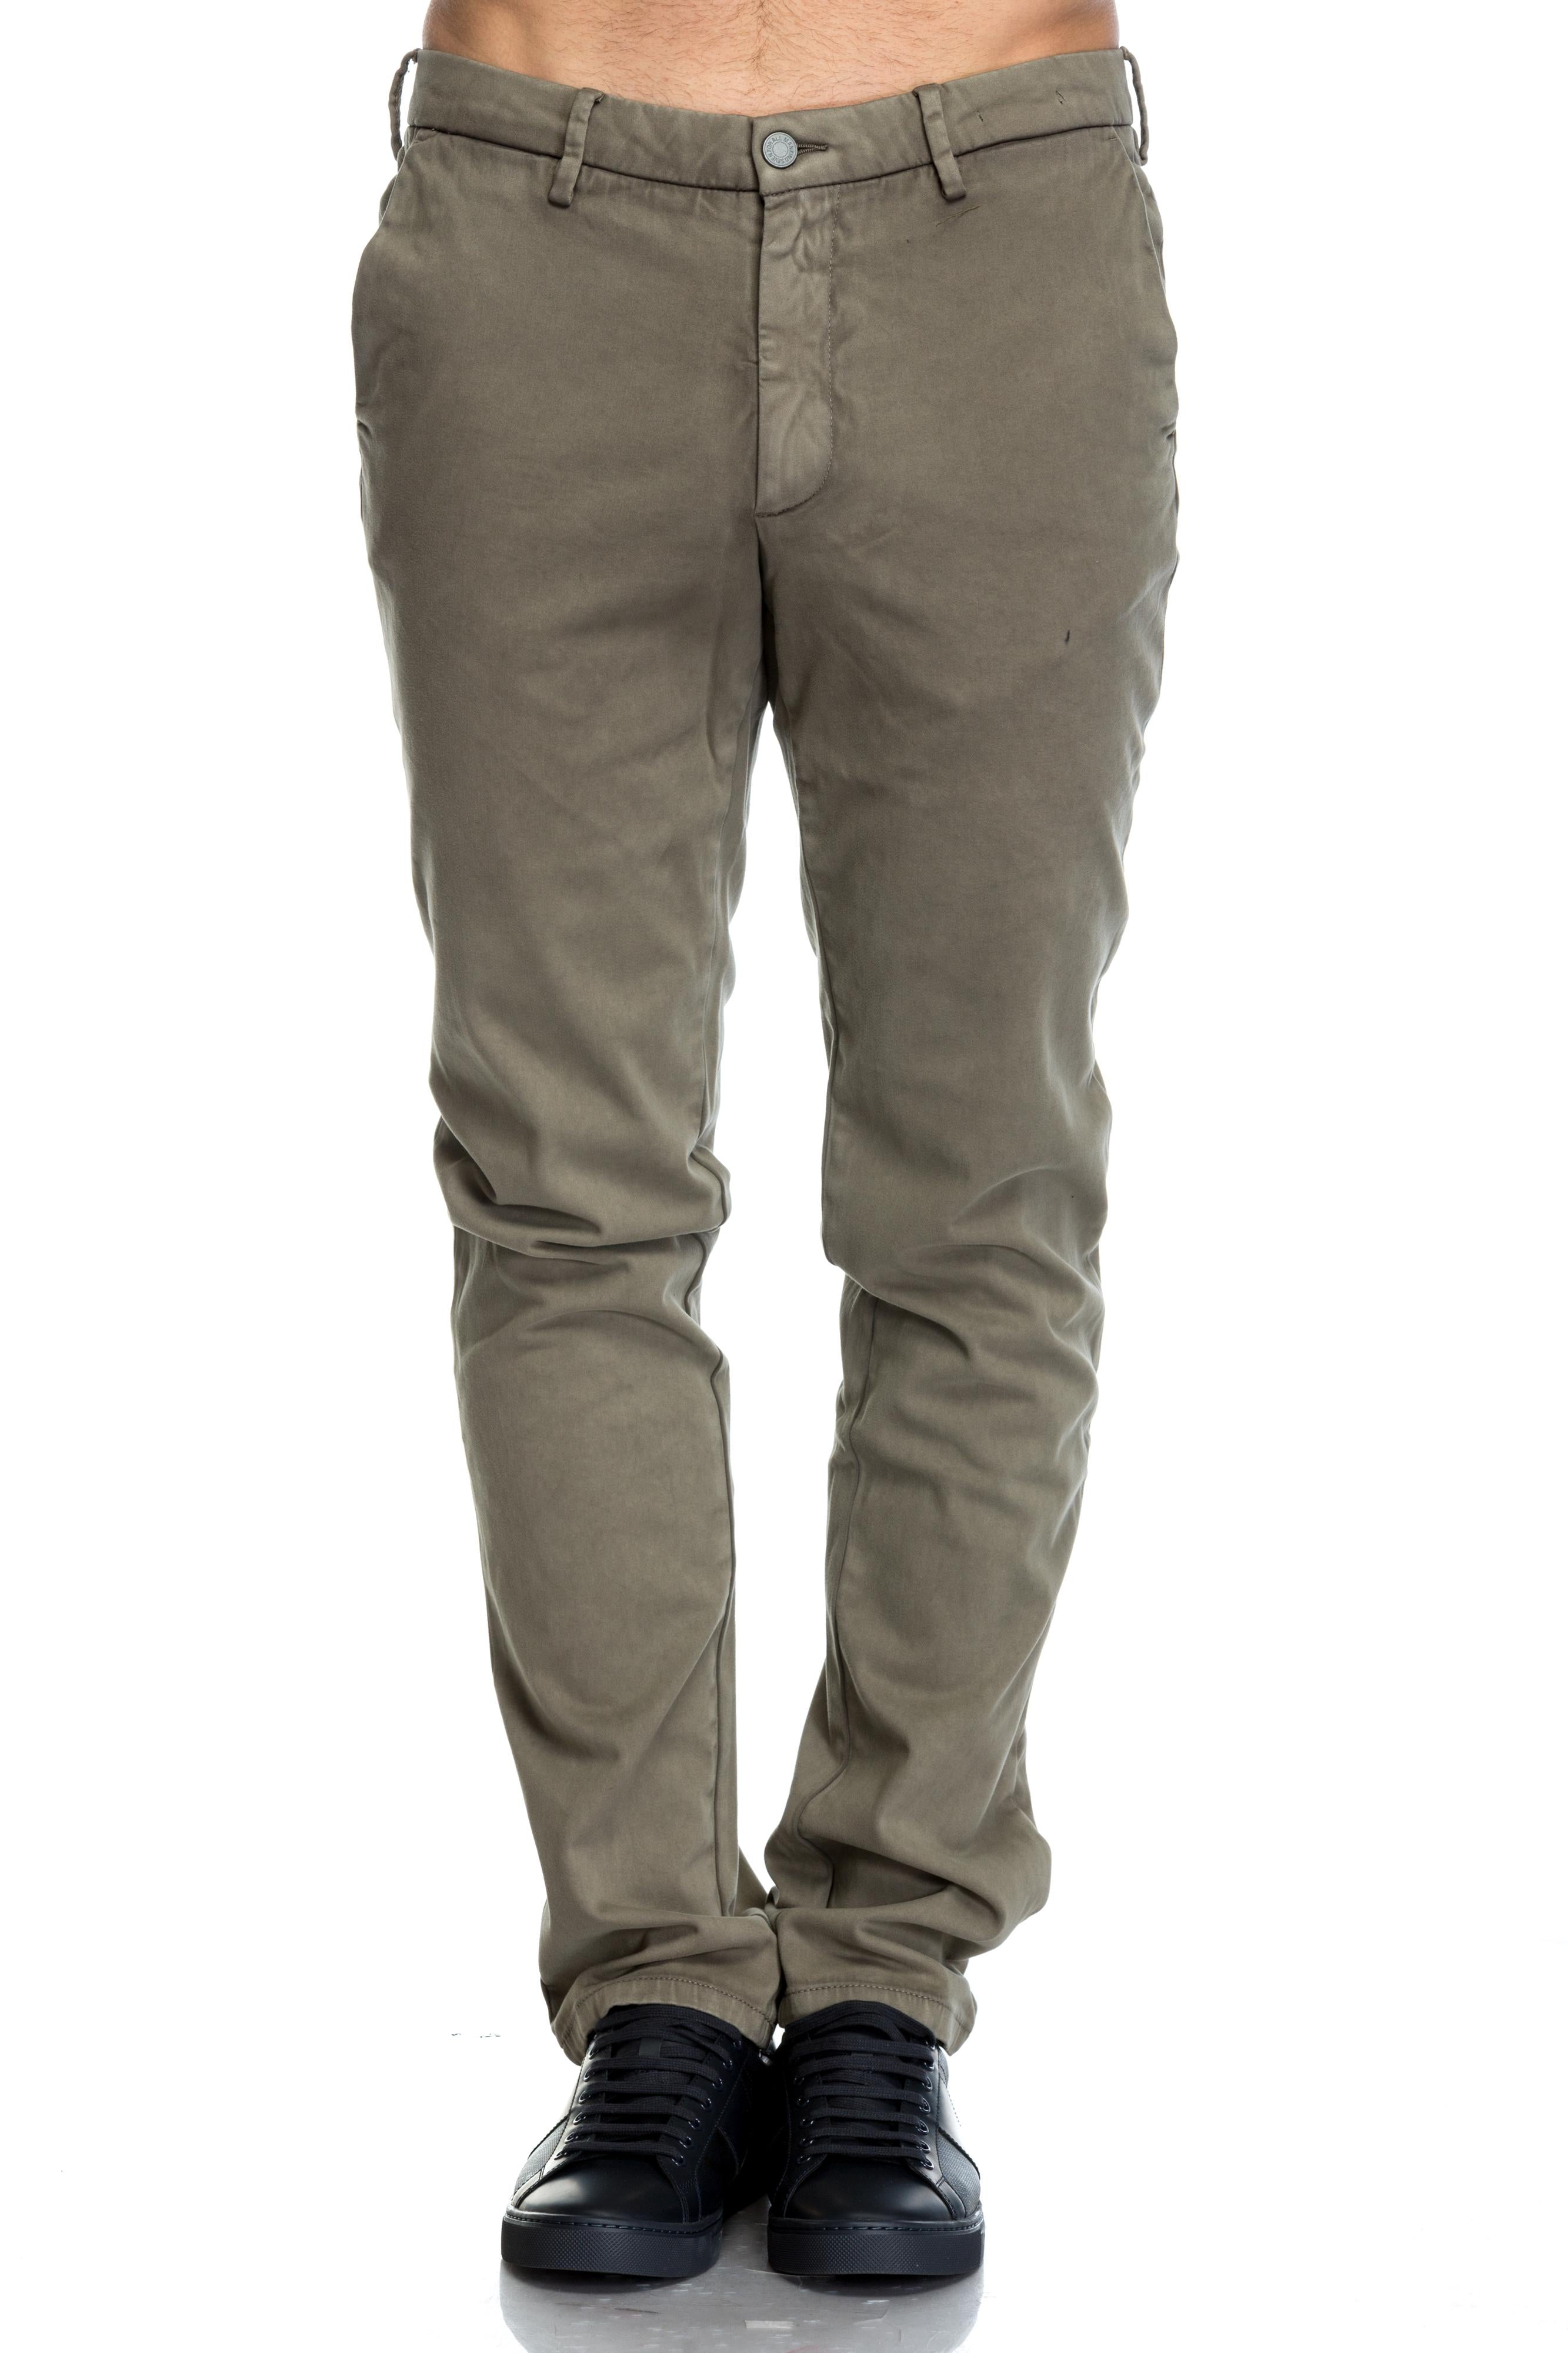 Jeansi Tailored Chino Light Sage Luxe Performance 7 For All Mankind